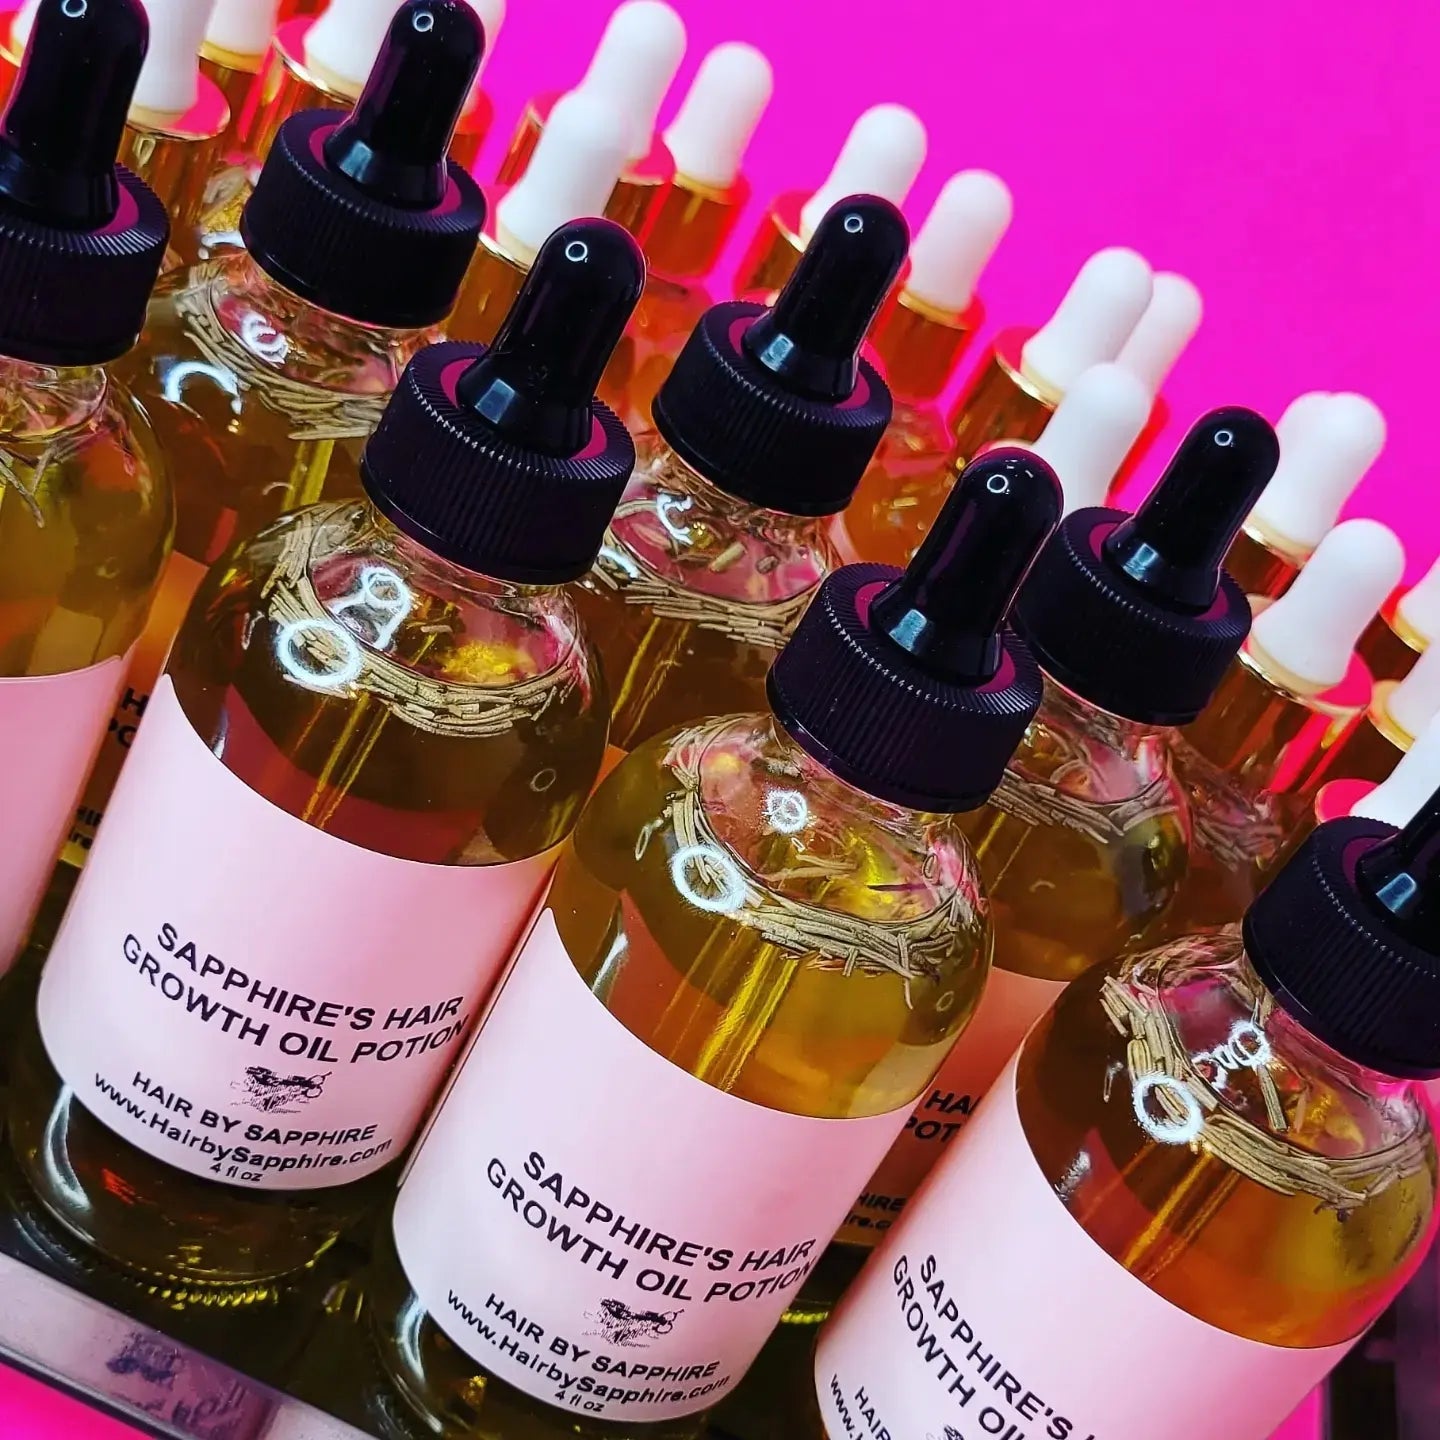 Film/TV Hair Stylist and Wig Maker Sapphire Launches paraben-free Hair Growth Oil Potion